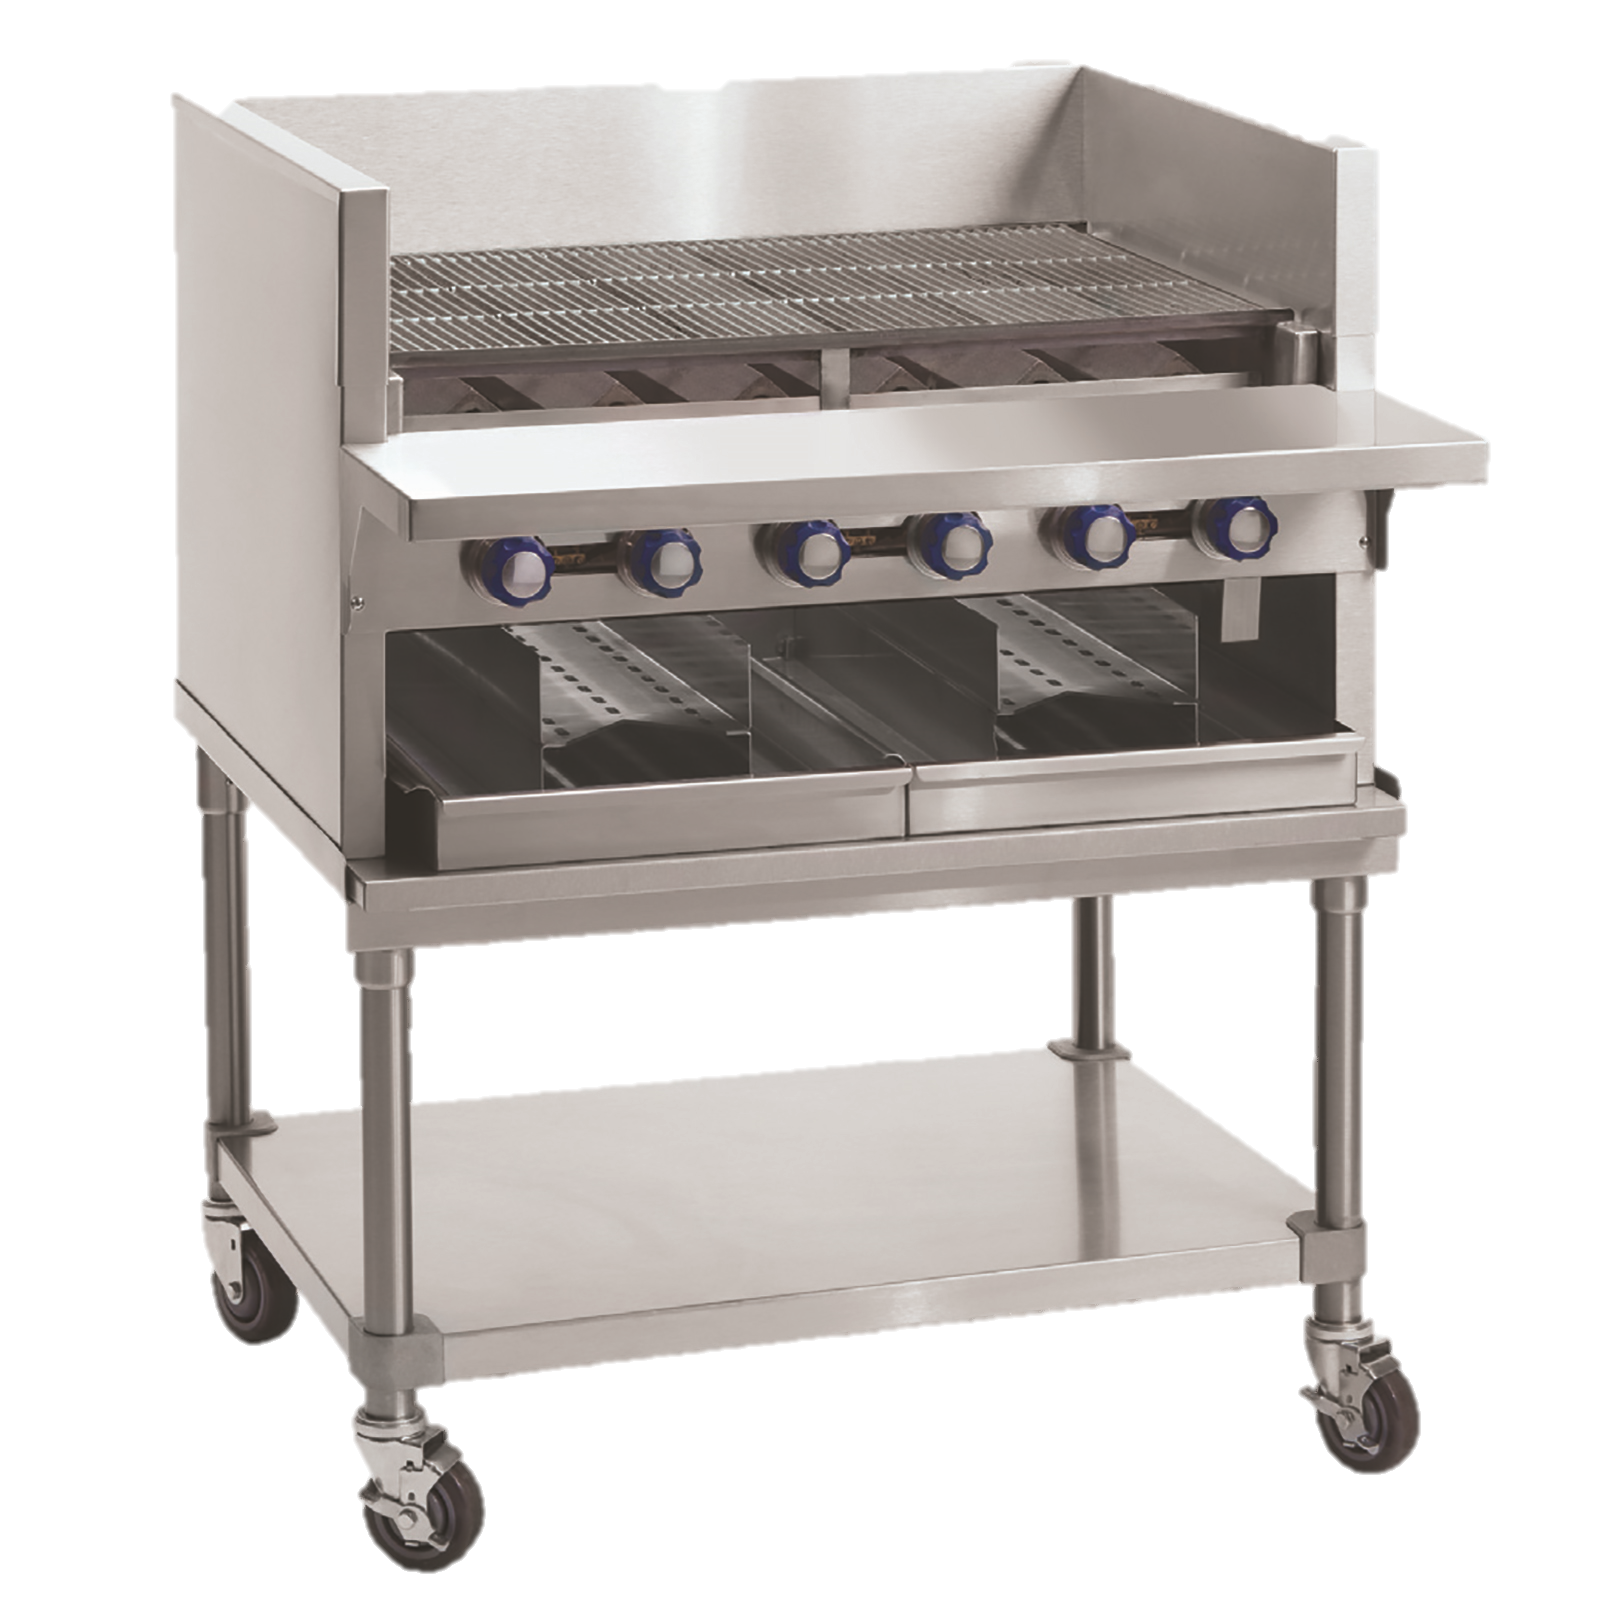 superior-equipment-supply - Imperial - Imperial Stainless Steel 36" Wide Equipment Stand